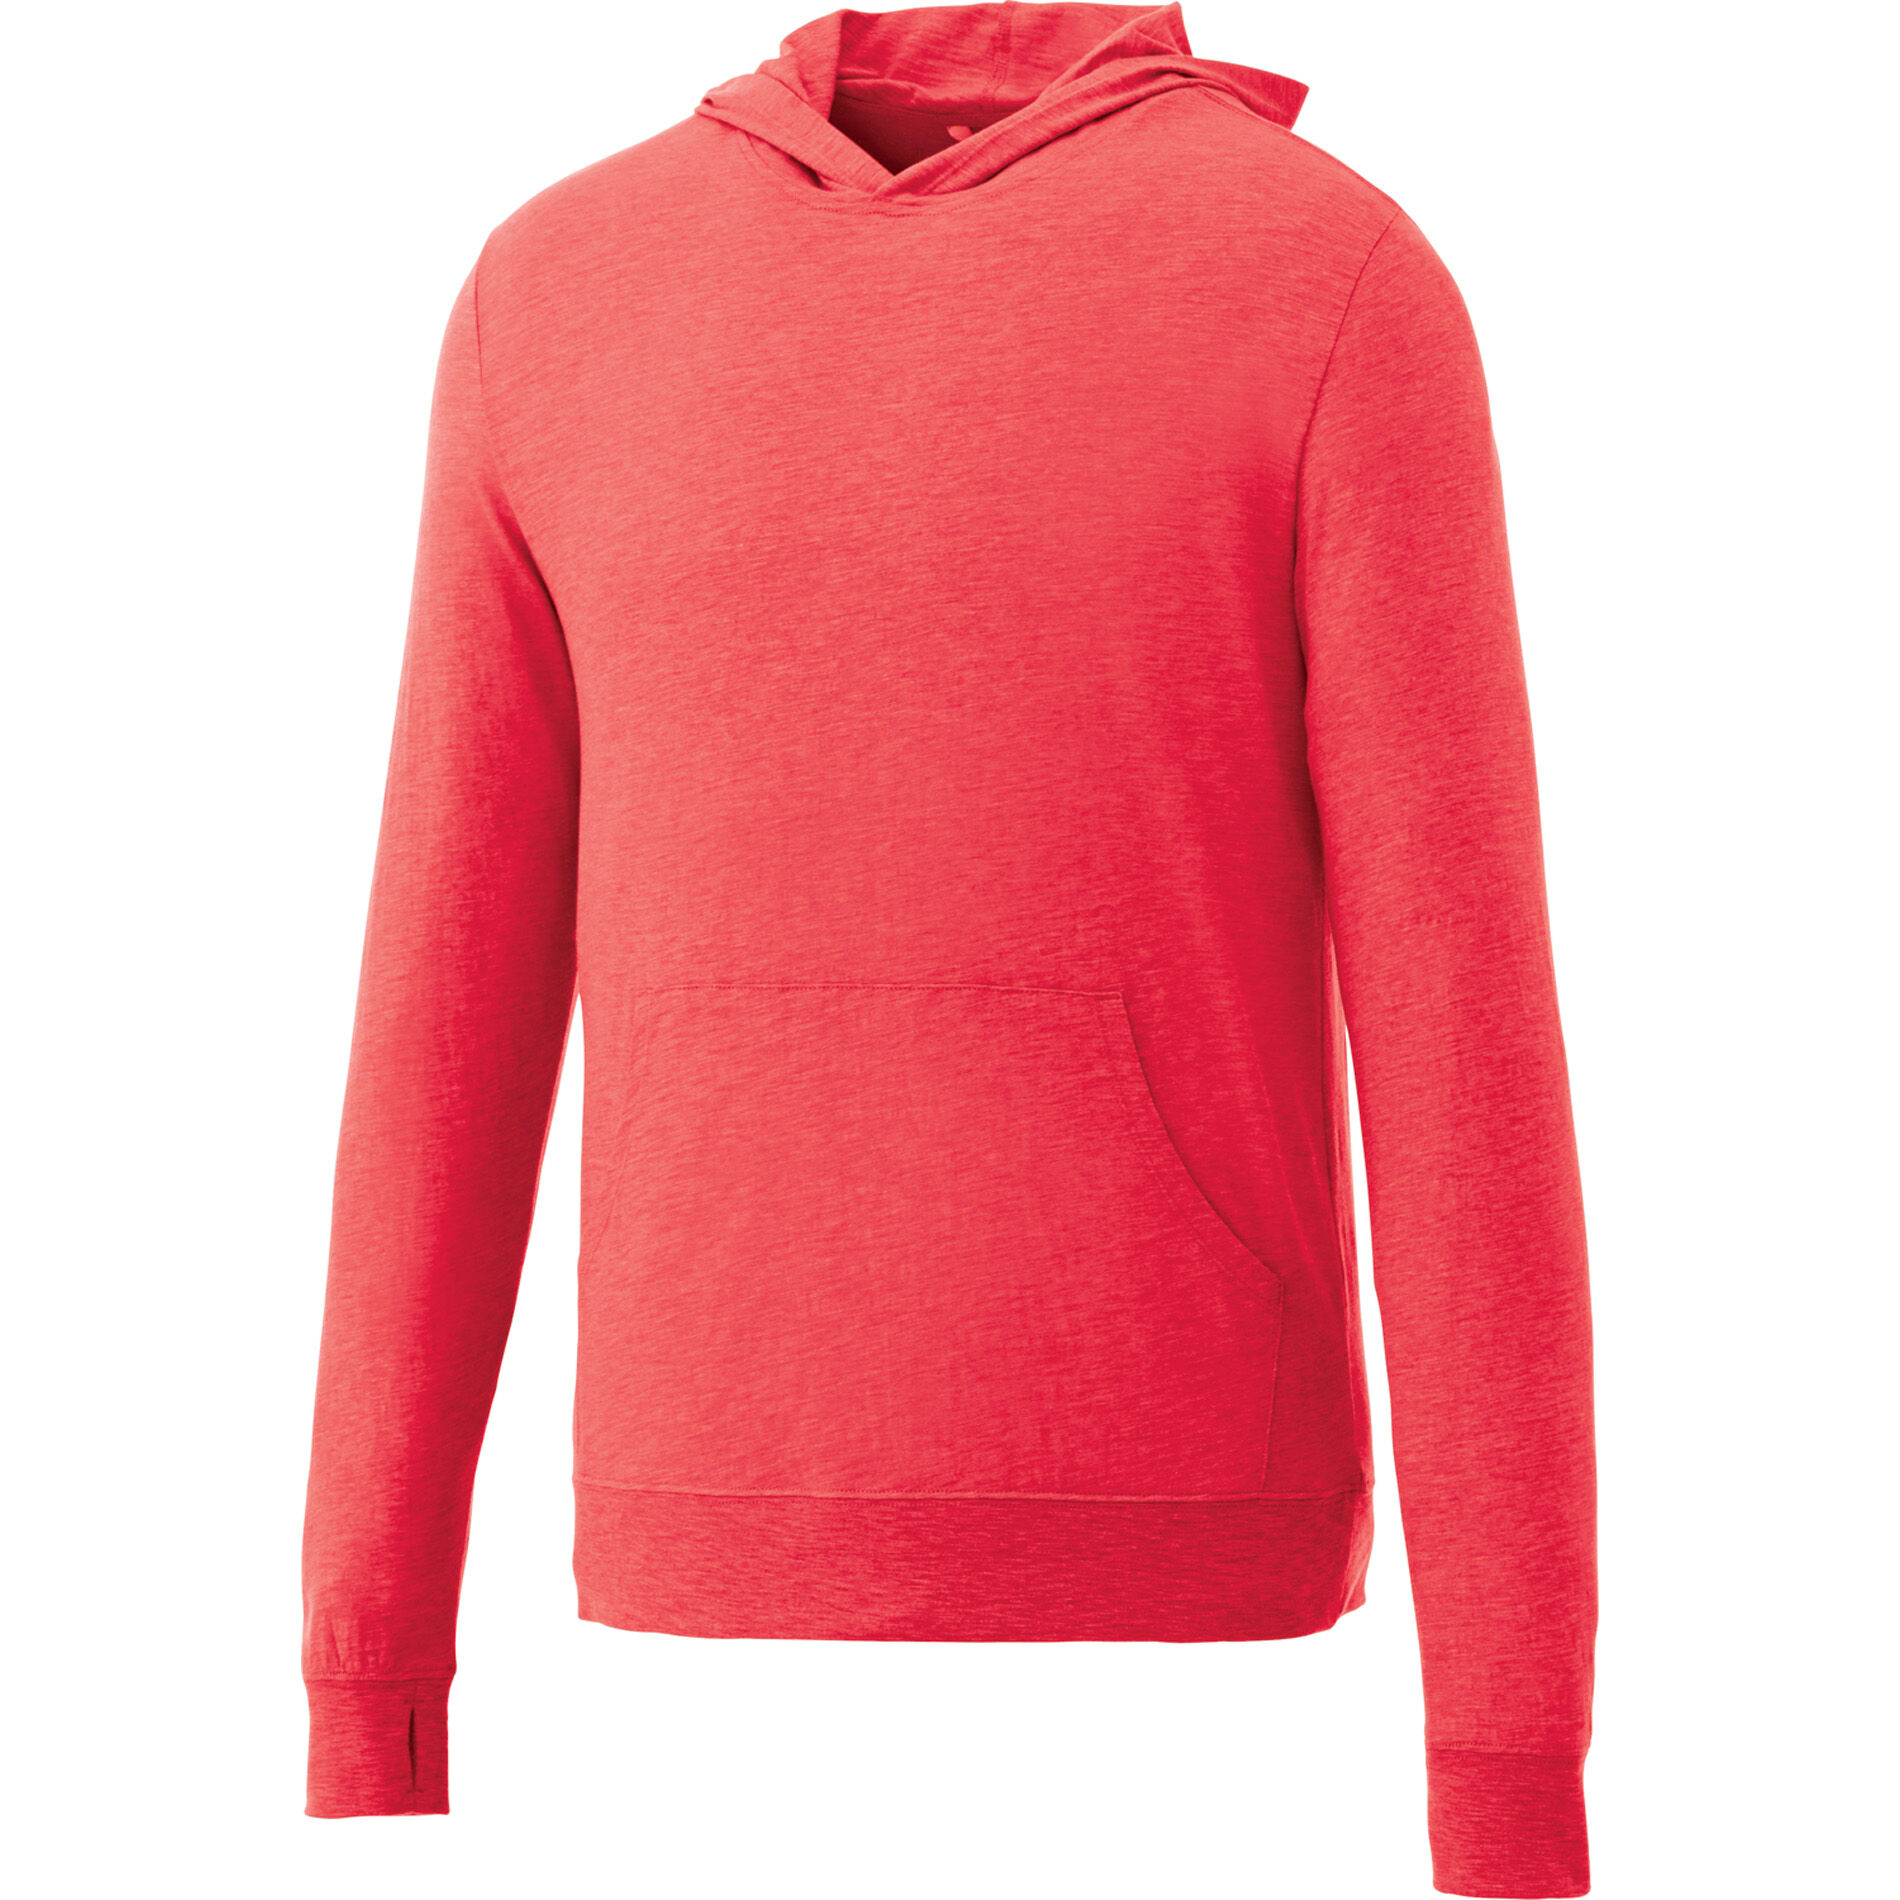 Custom Branded Howson Knit Hoody (Male) - Team Red Heather